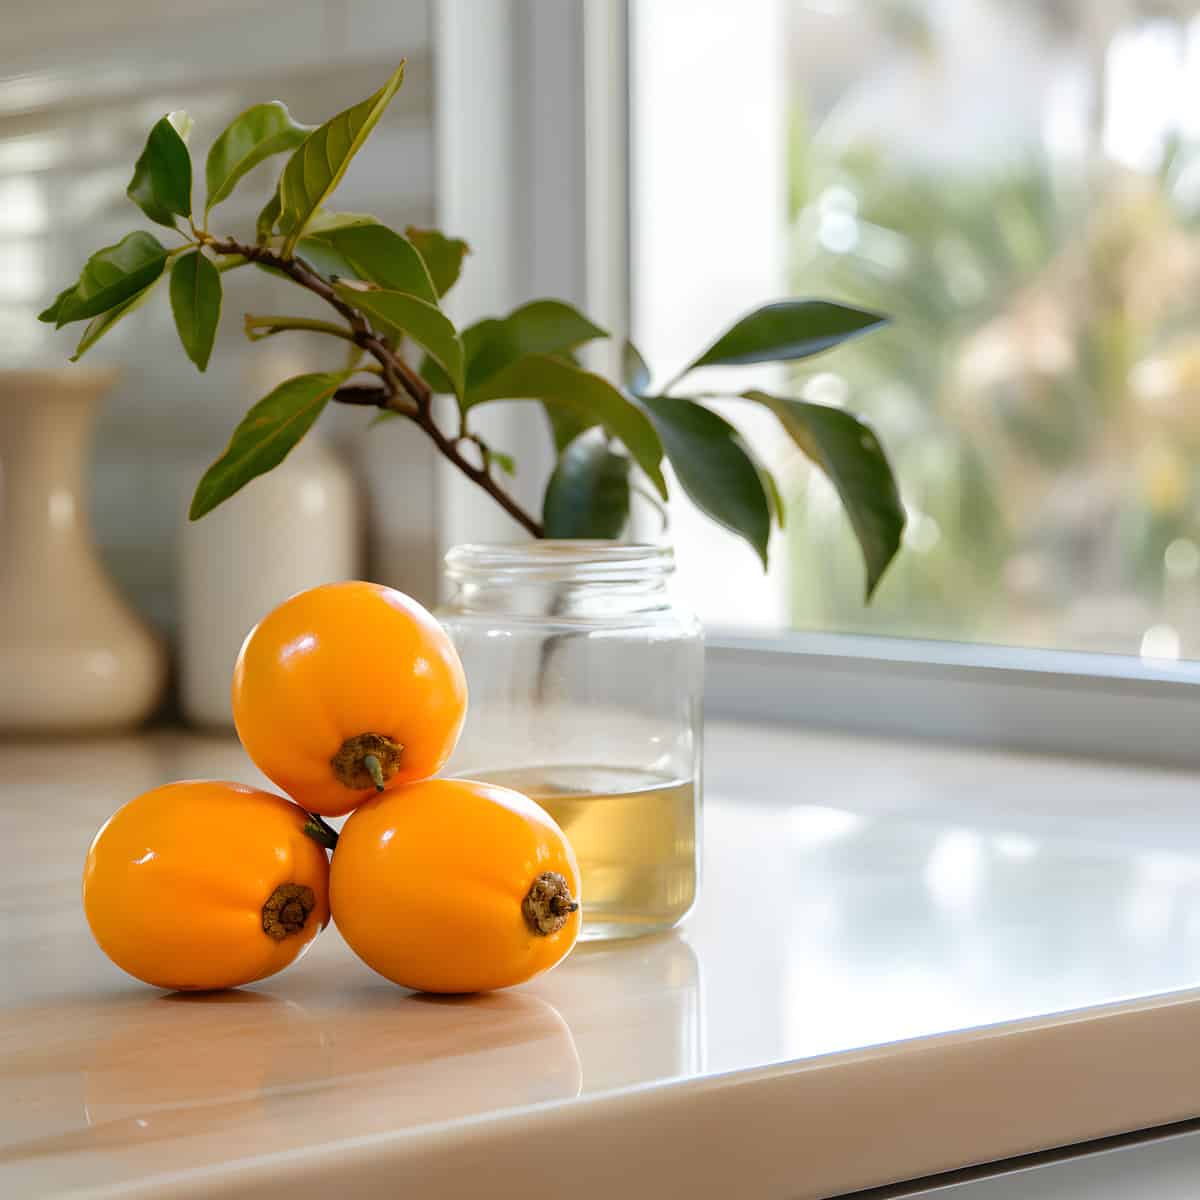 Loquat on a kitchen counter